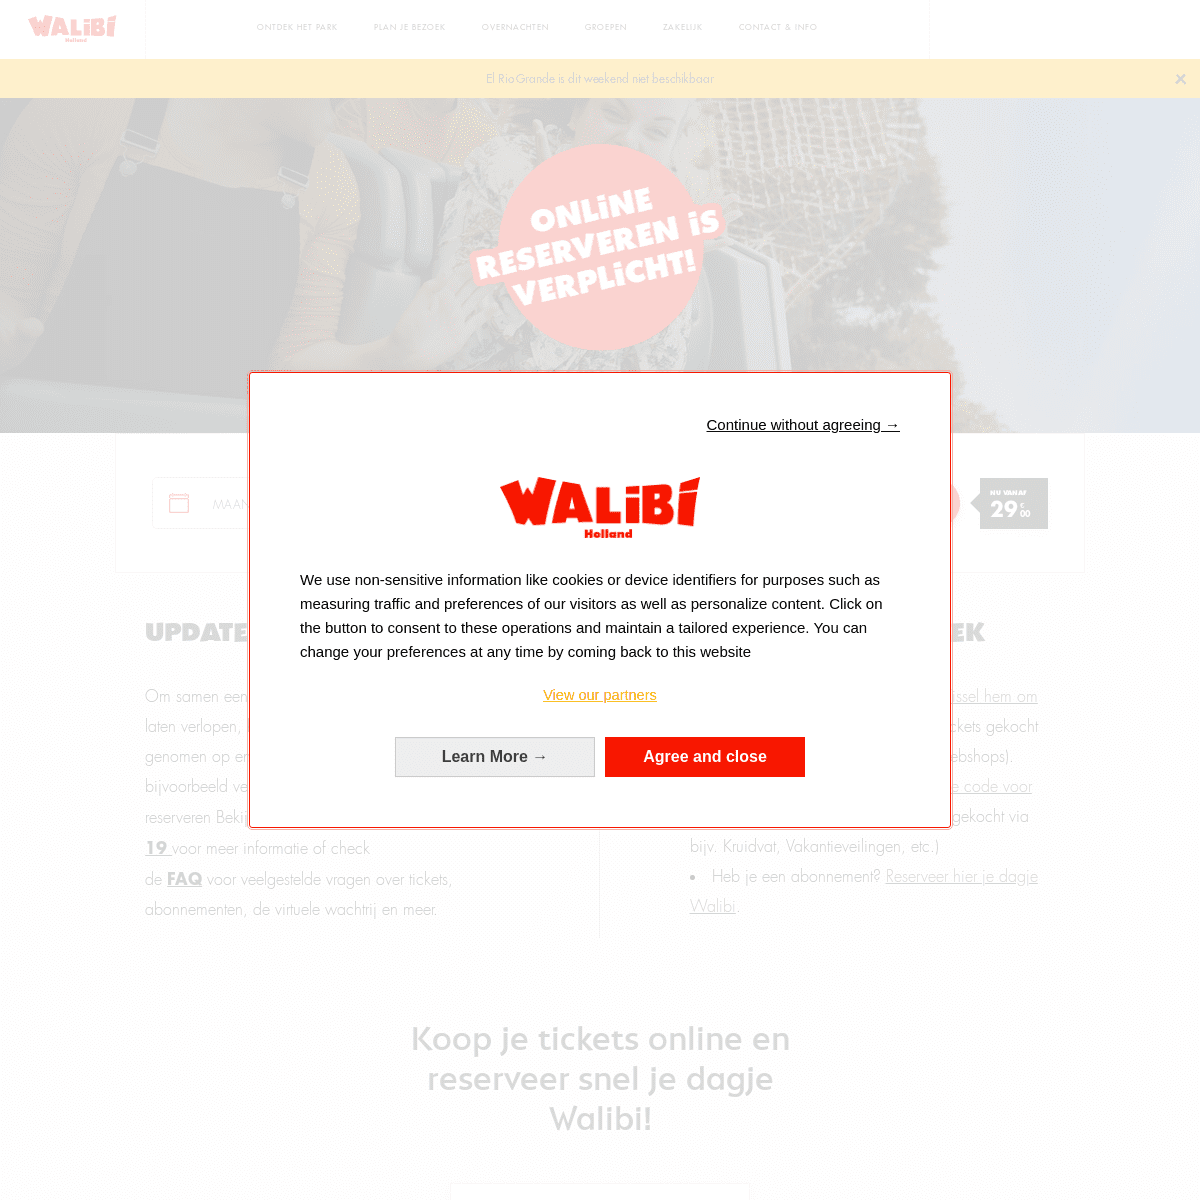 A complete backup of https://walibi.nl